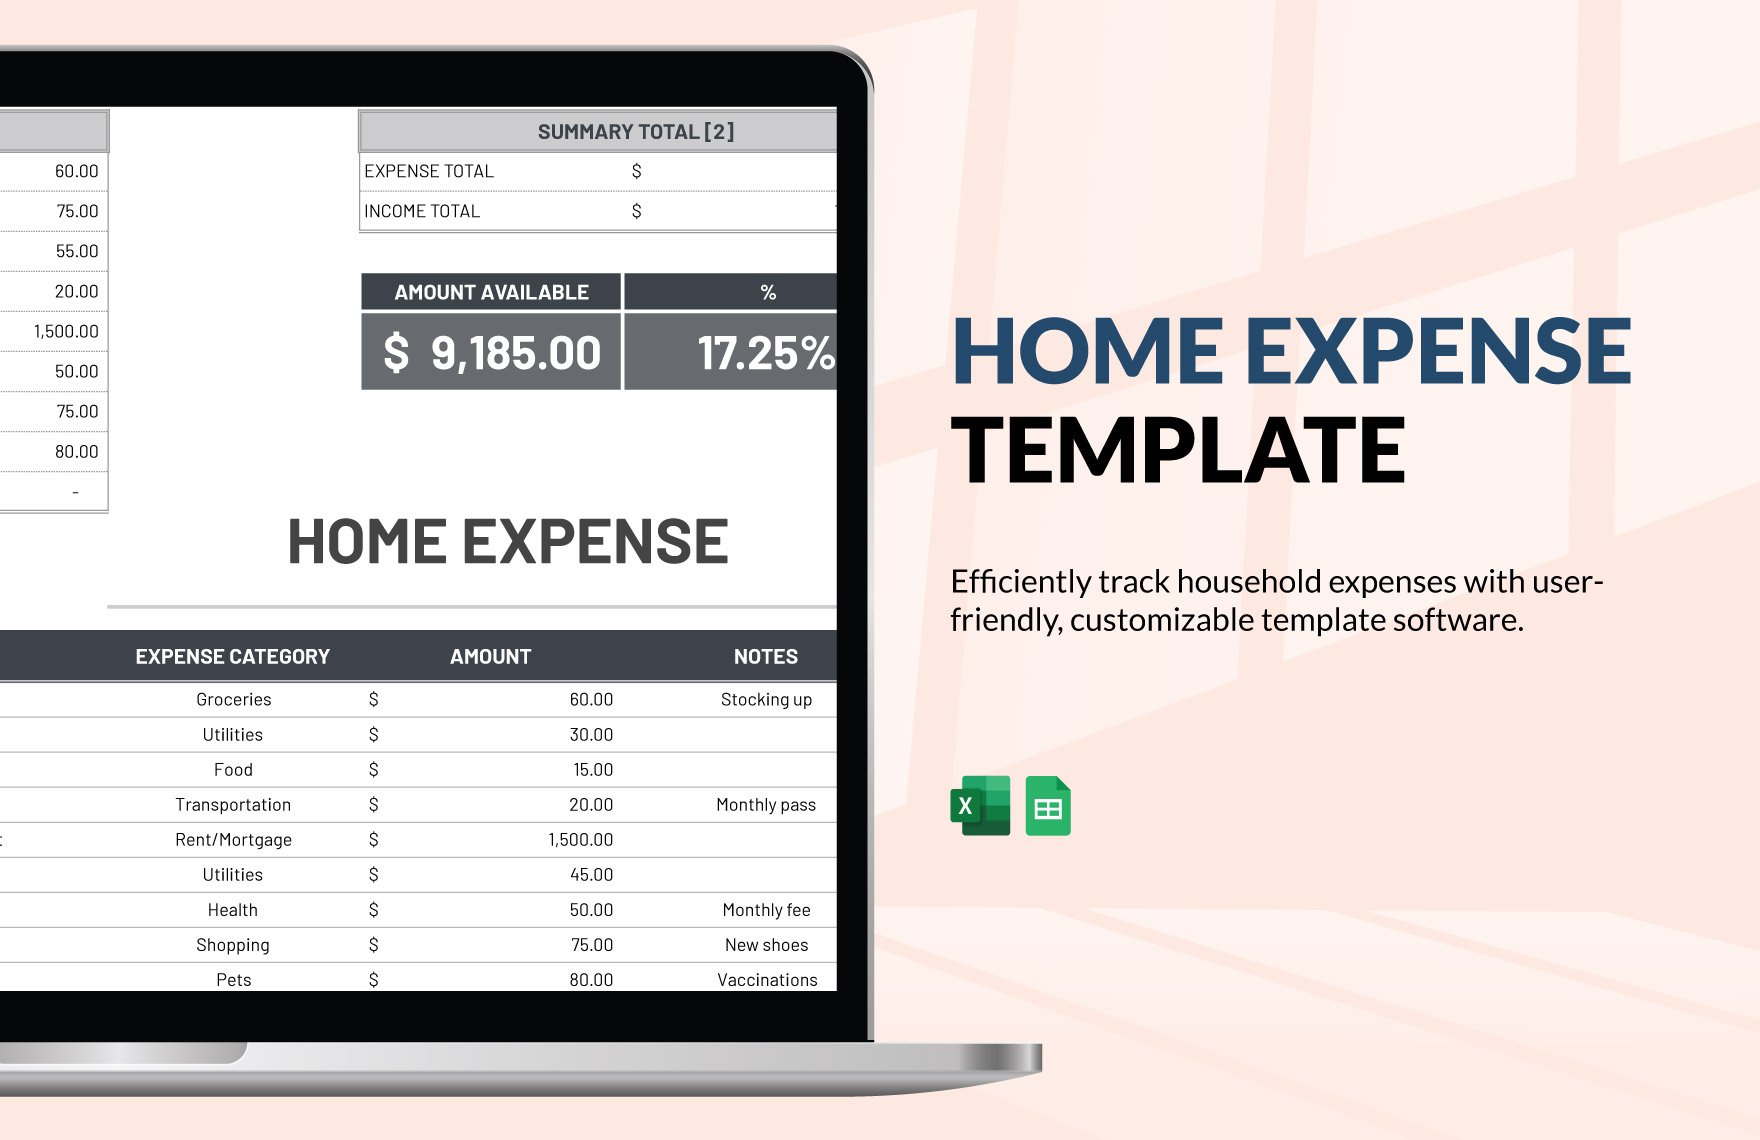 Home Expense Template